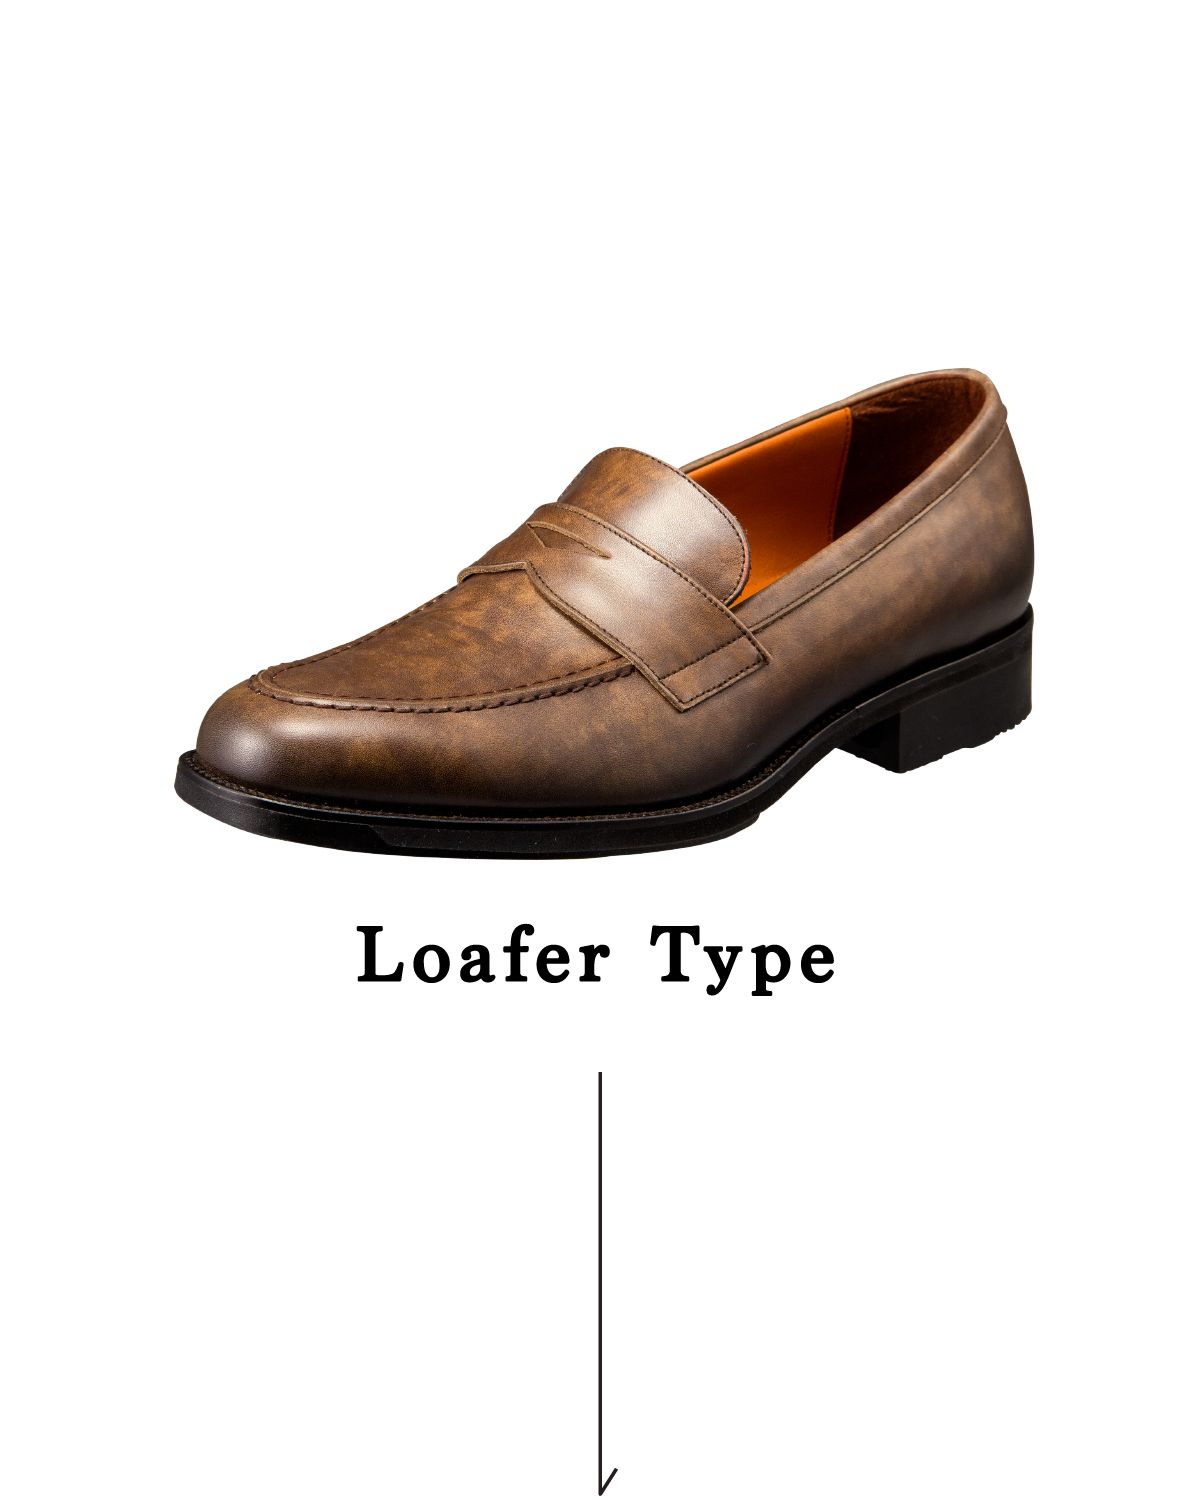 Loafer Type